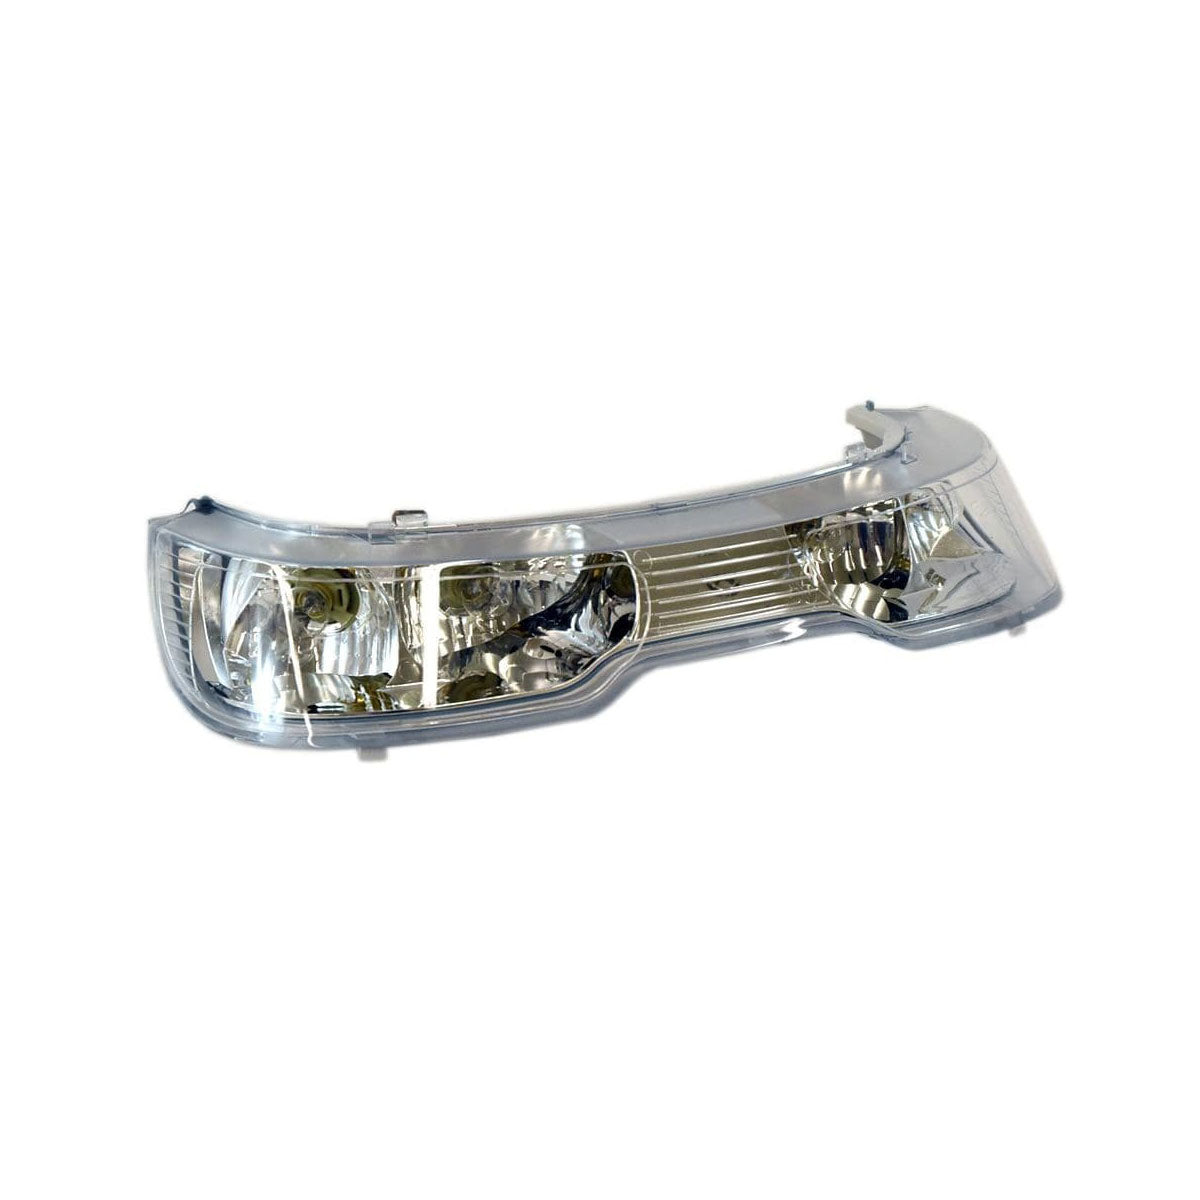 Simplicity/Snapper Lawn Tractor Headlight Assembly (1721810SM)